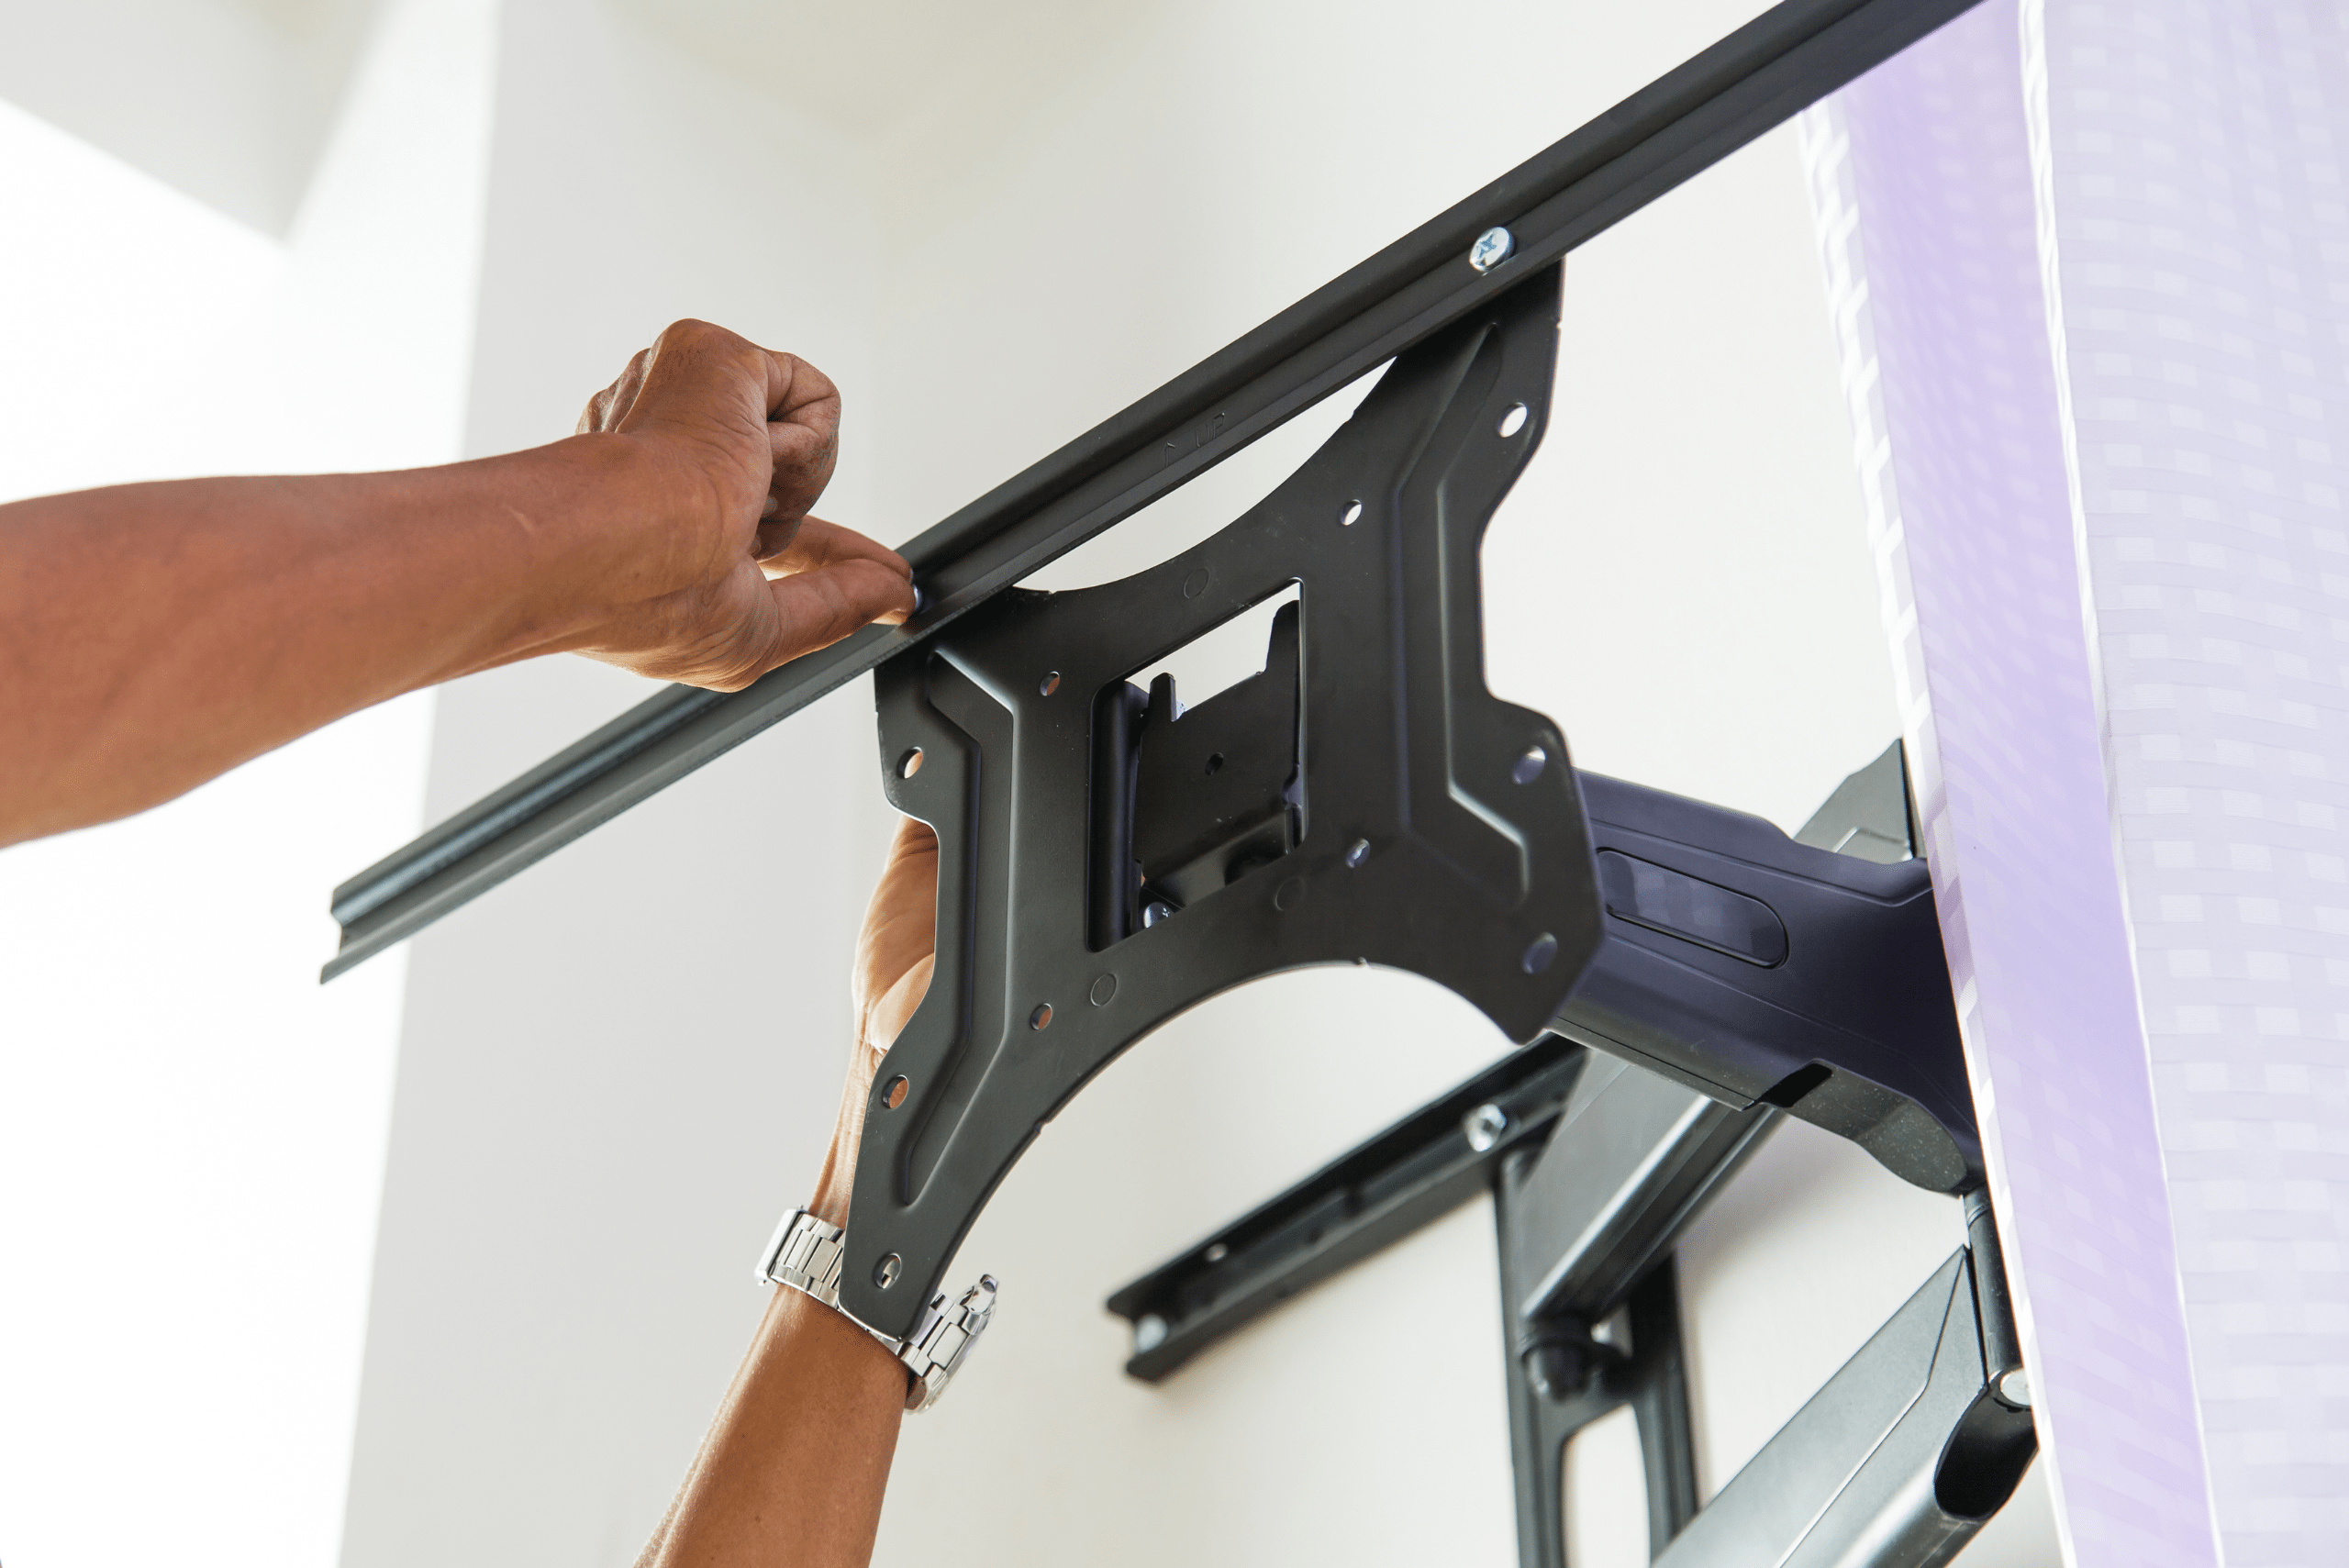 Using drywall anchors to mount TV.